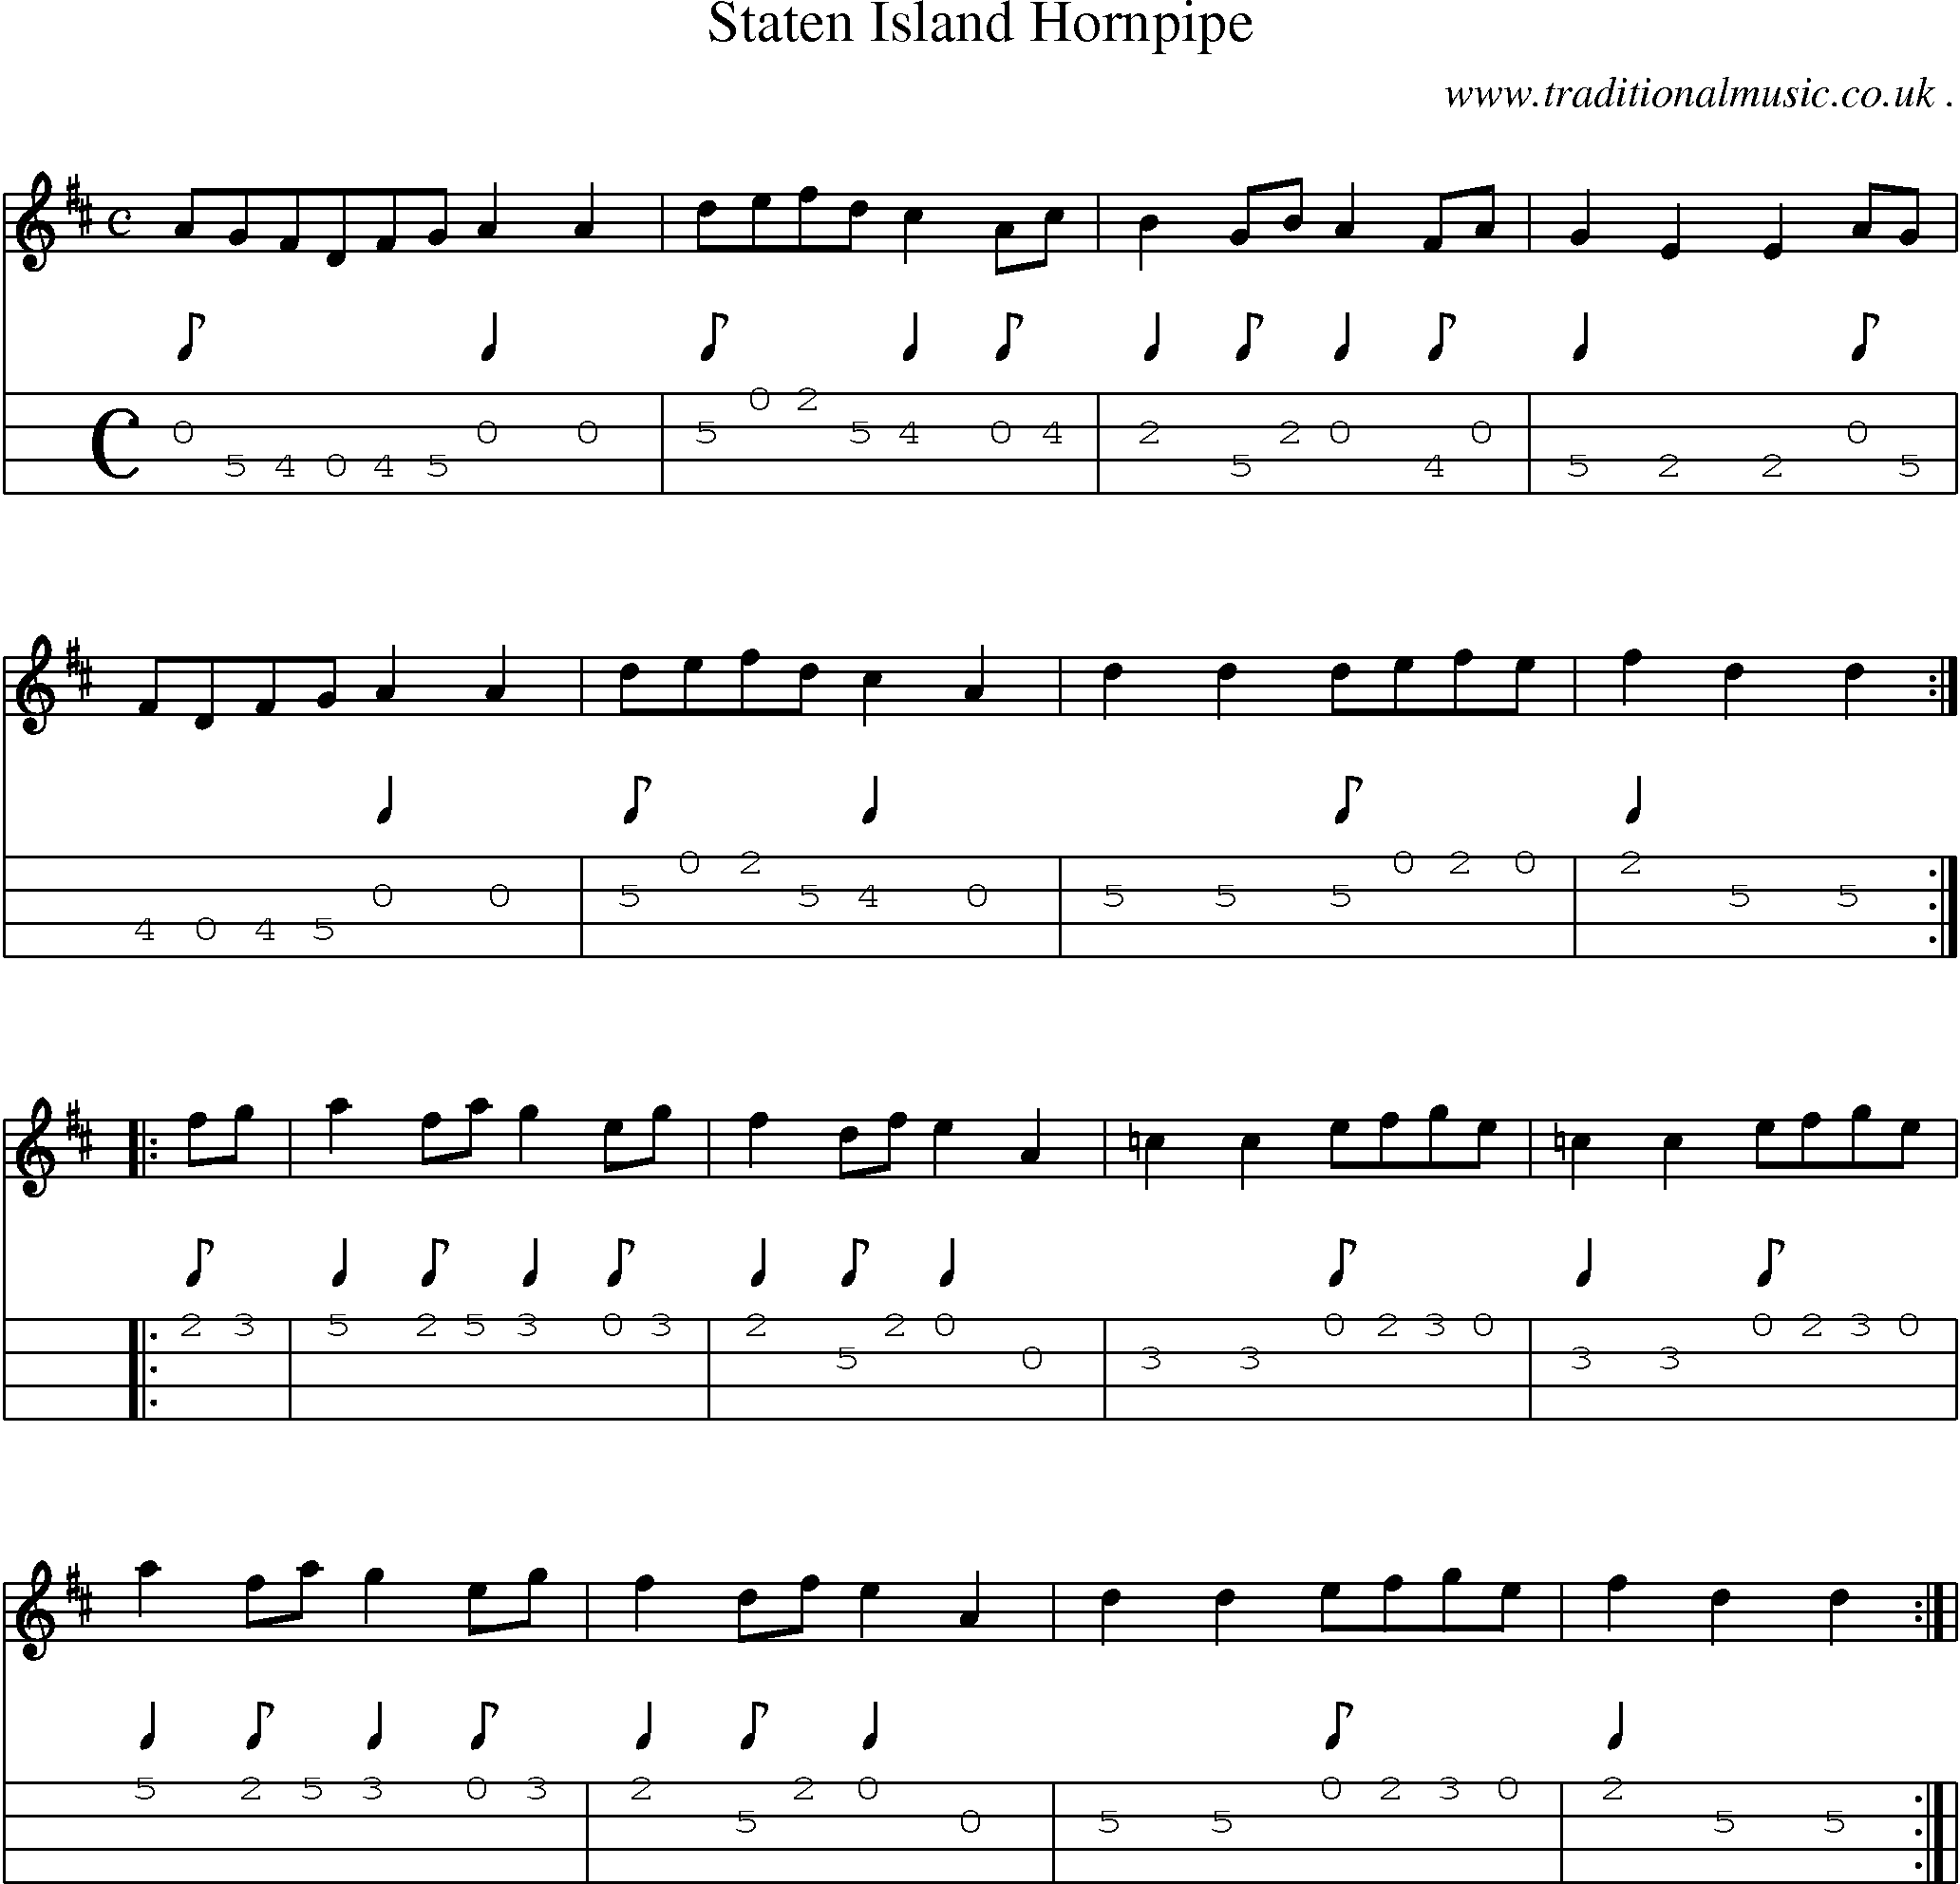 Sheet-Music and Mandolin Tabs for Staten Island Hornpipe